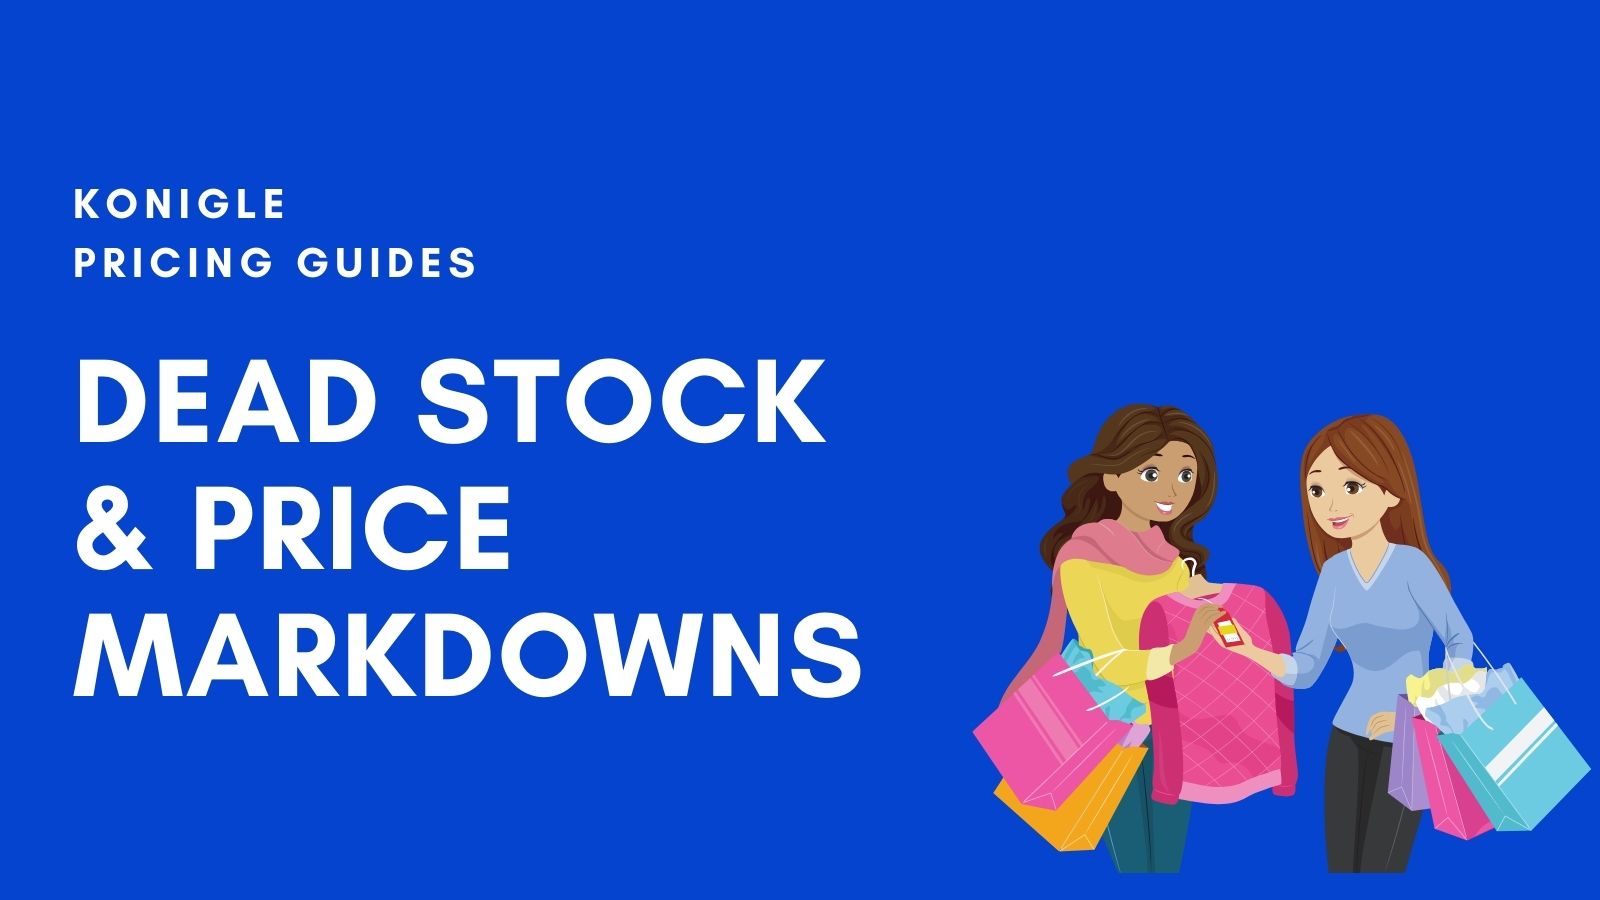 Dead Stock and Price Markdowns